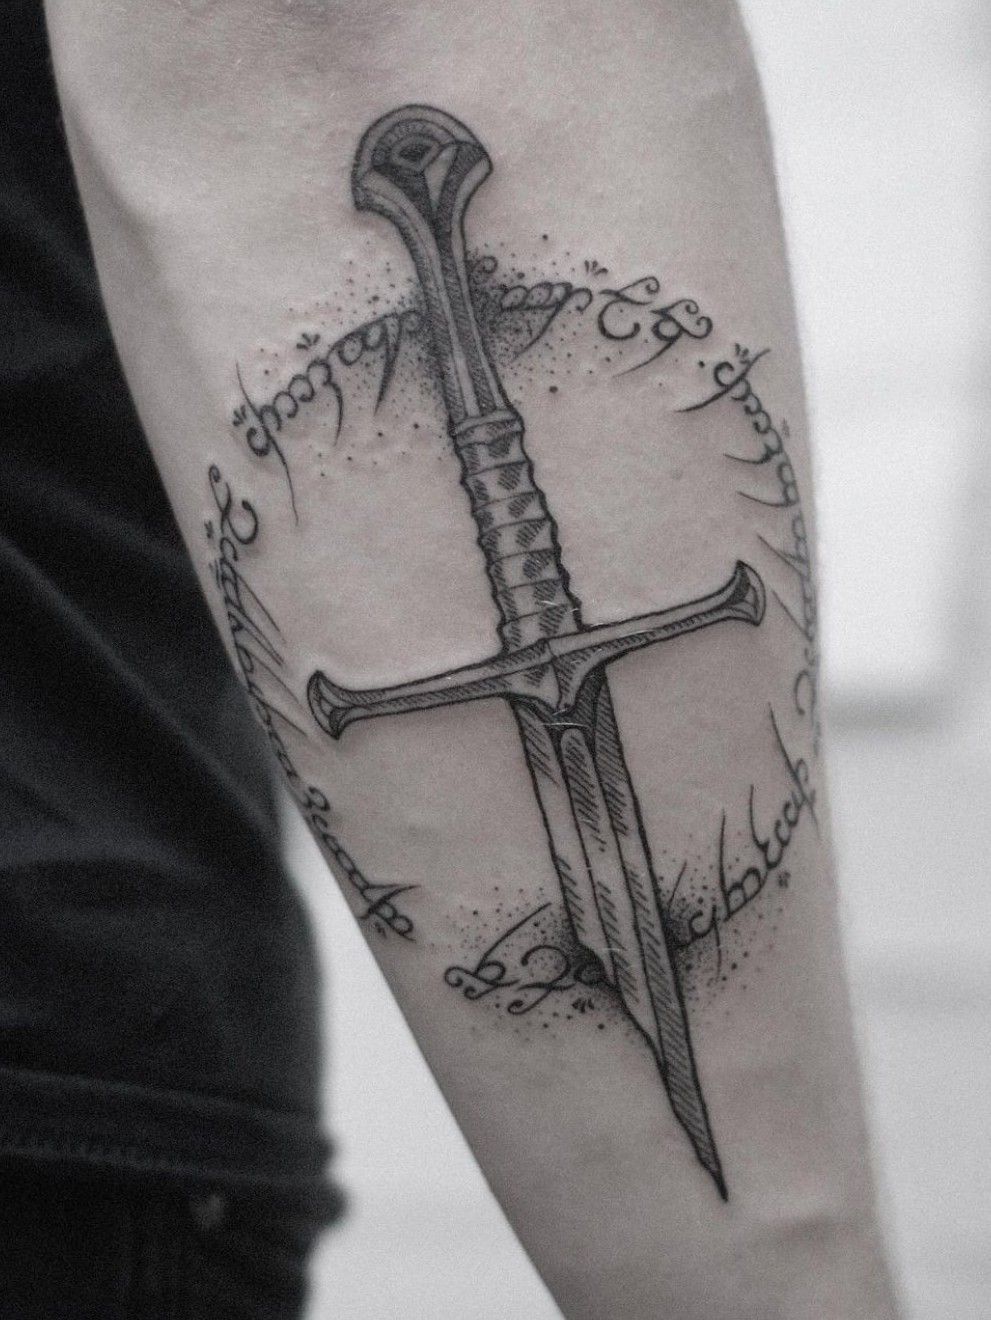 Narsil sword on the super champion liamdodds96 Who survived by my inked  sword But we are alive and is all good  nobody died xd  Studio XIII  Gallery